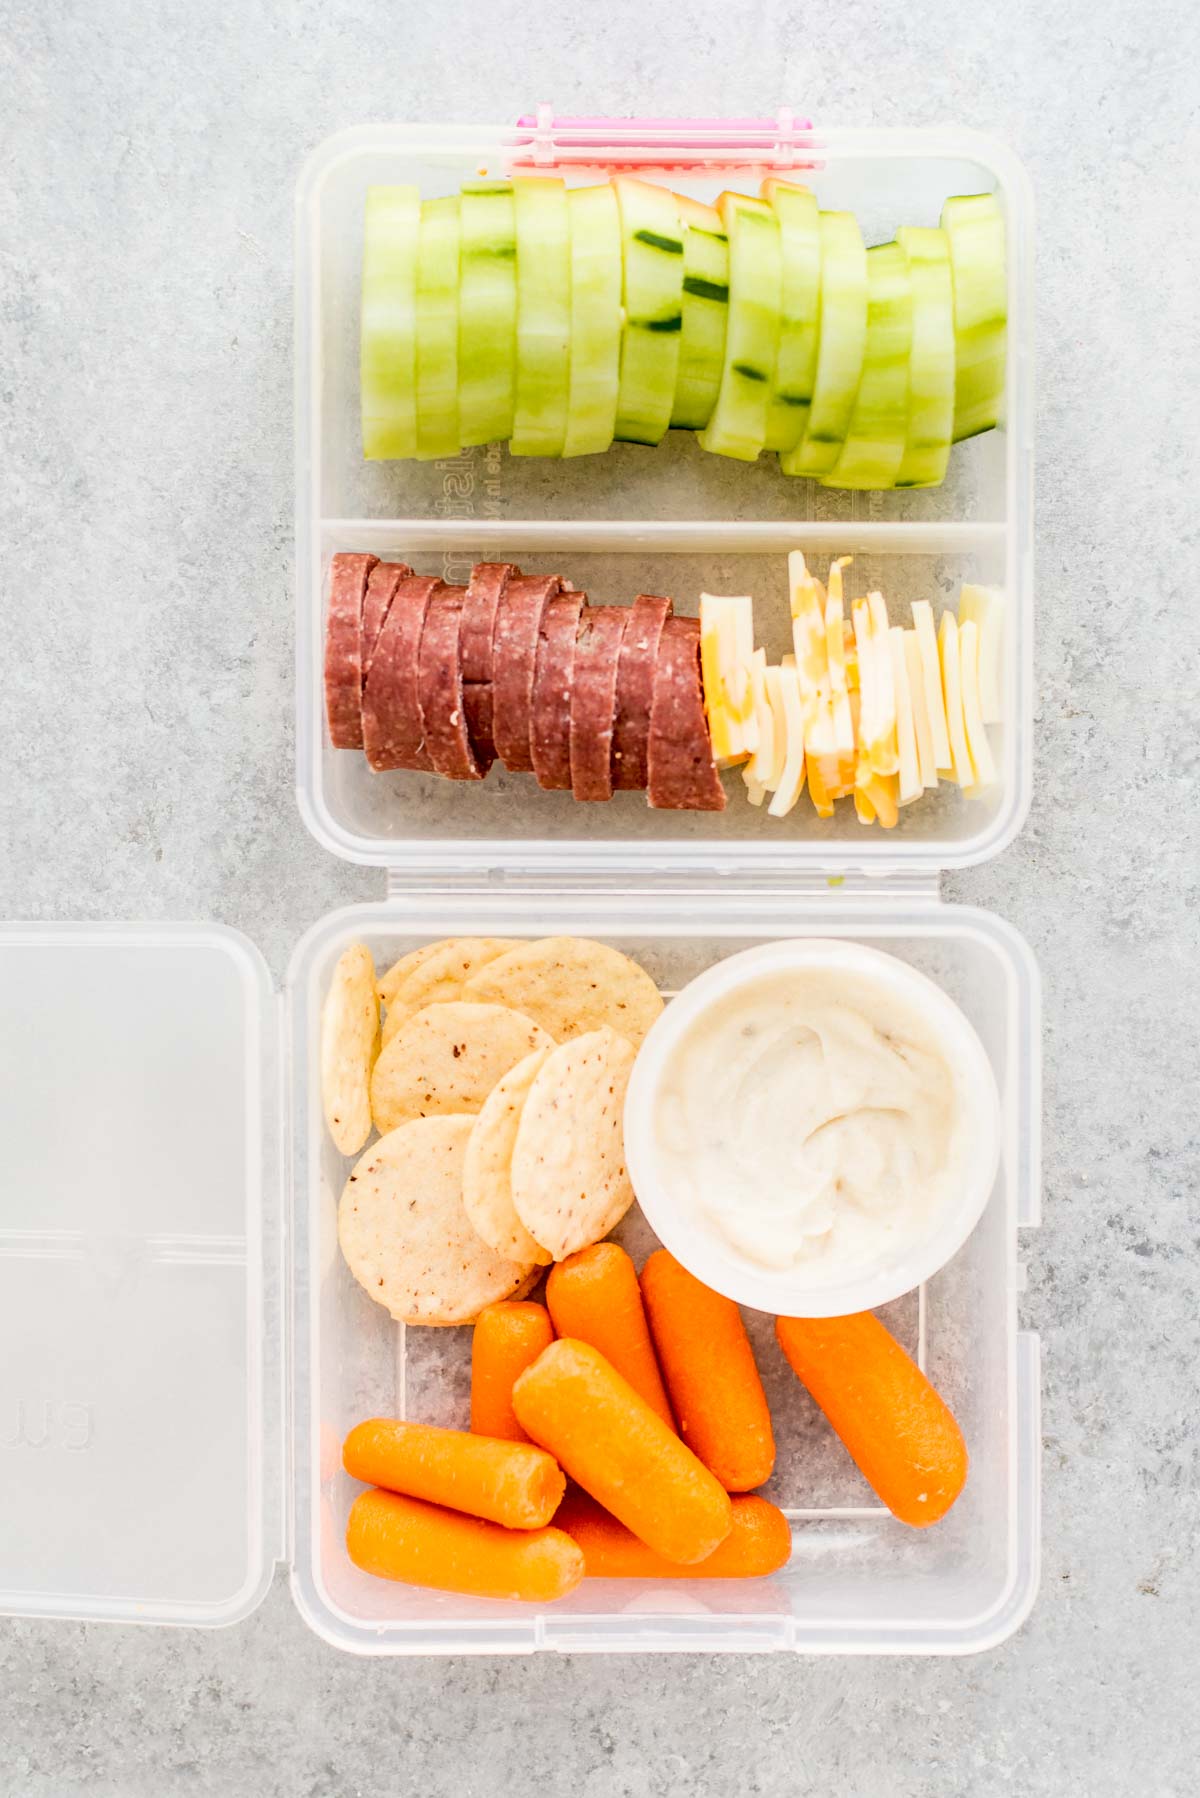 5 Simple Lunch Ideas that Will Make You Enjoy Packing Lunch